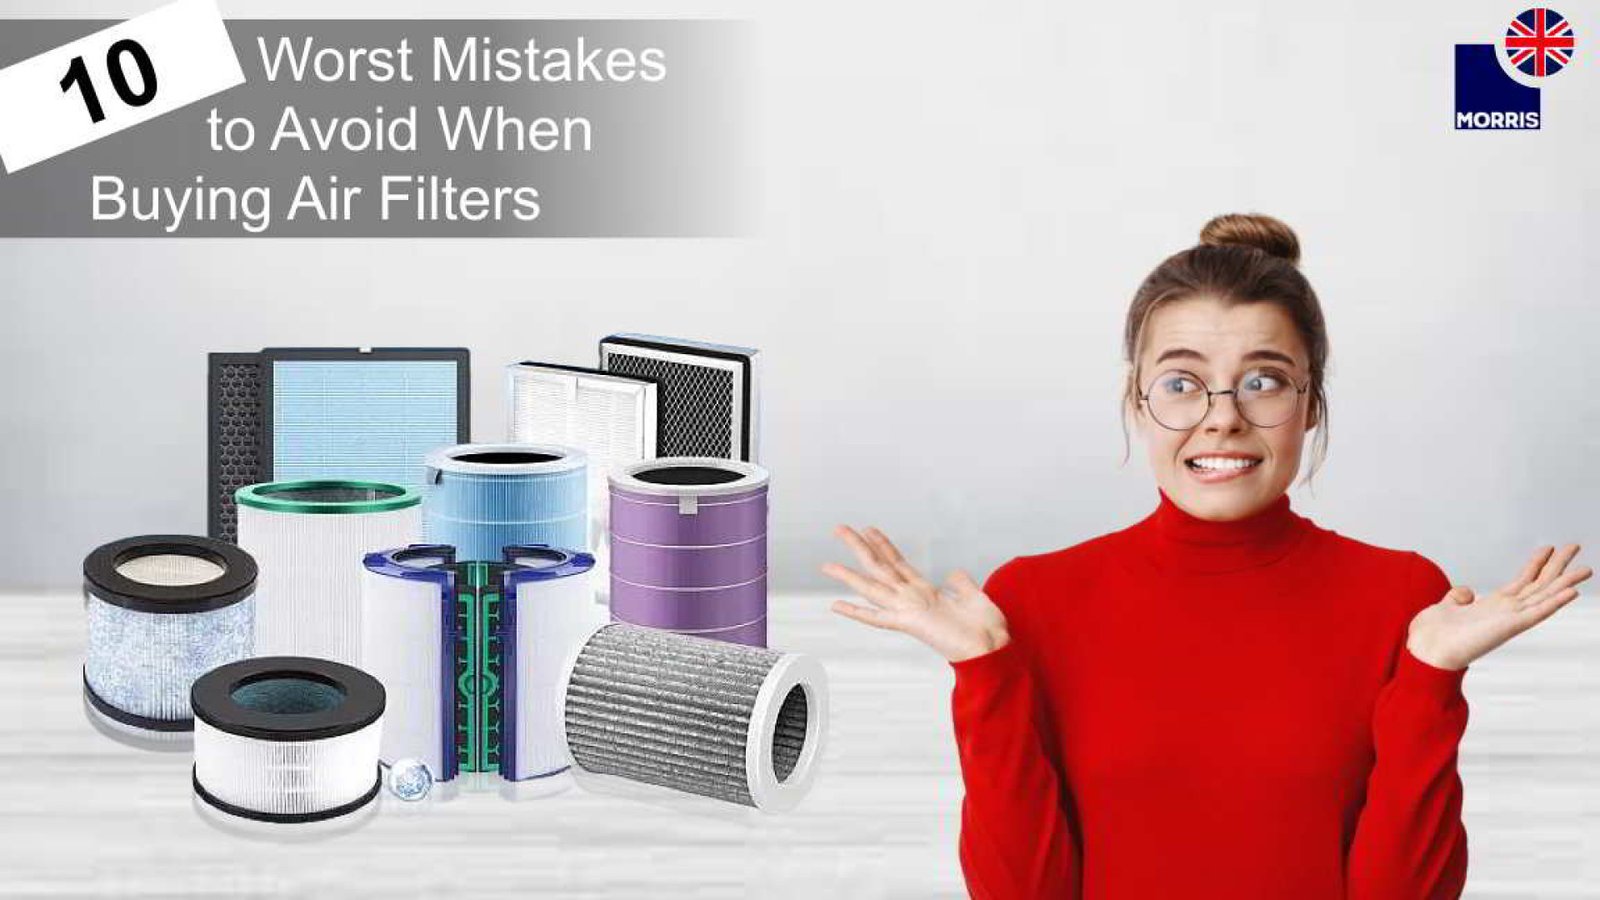 https://morrisdirect.co.uk/image/cache/catalog/Blog-posts/Morris-Air-purifiers/10-mistakes-buying-air-filters/Morris-the-10-worst-mistakes-to-avoid-when-buying-air-filters-1920x1080.jpg